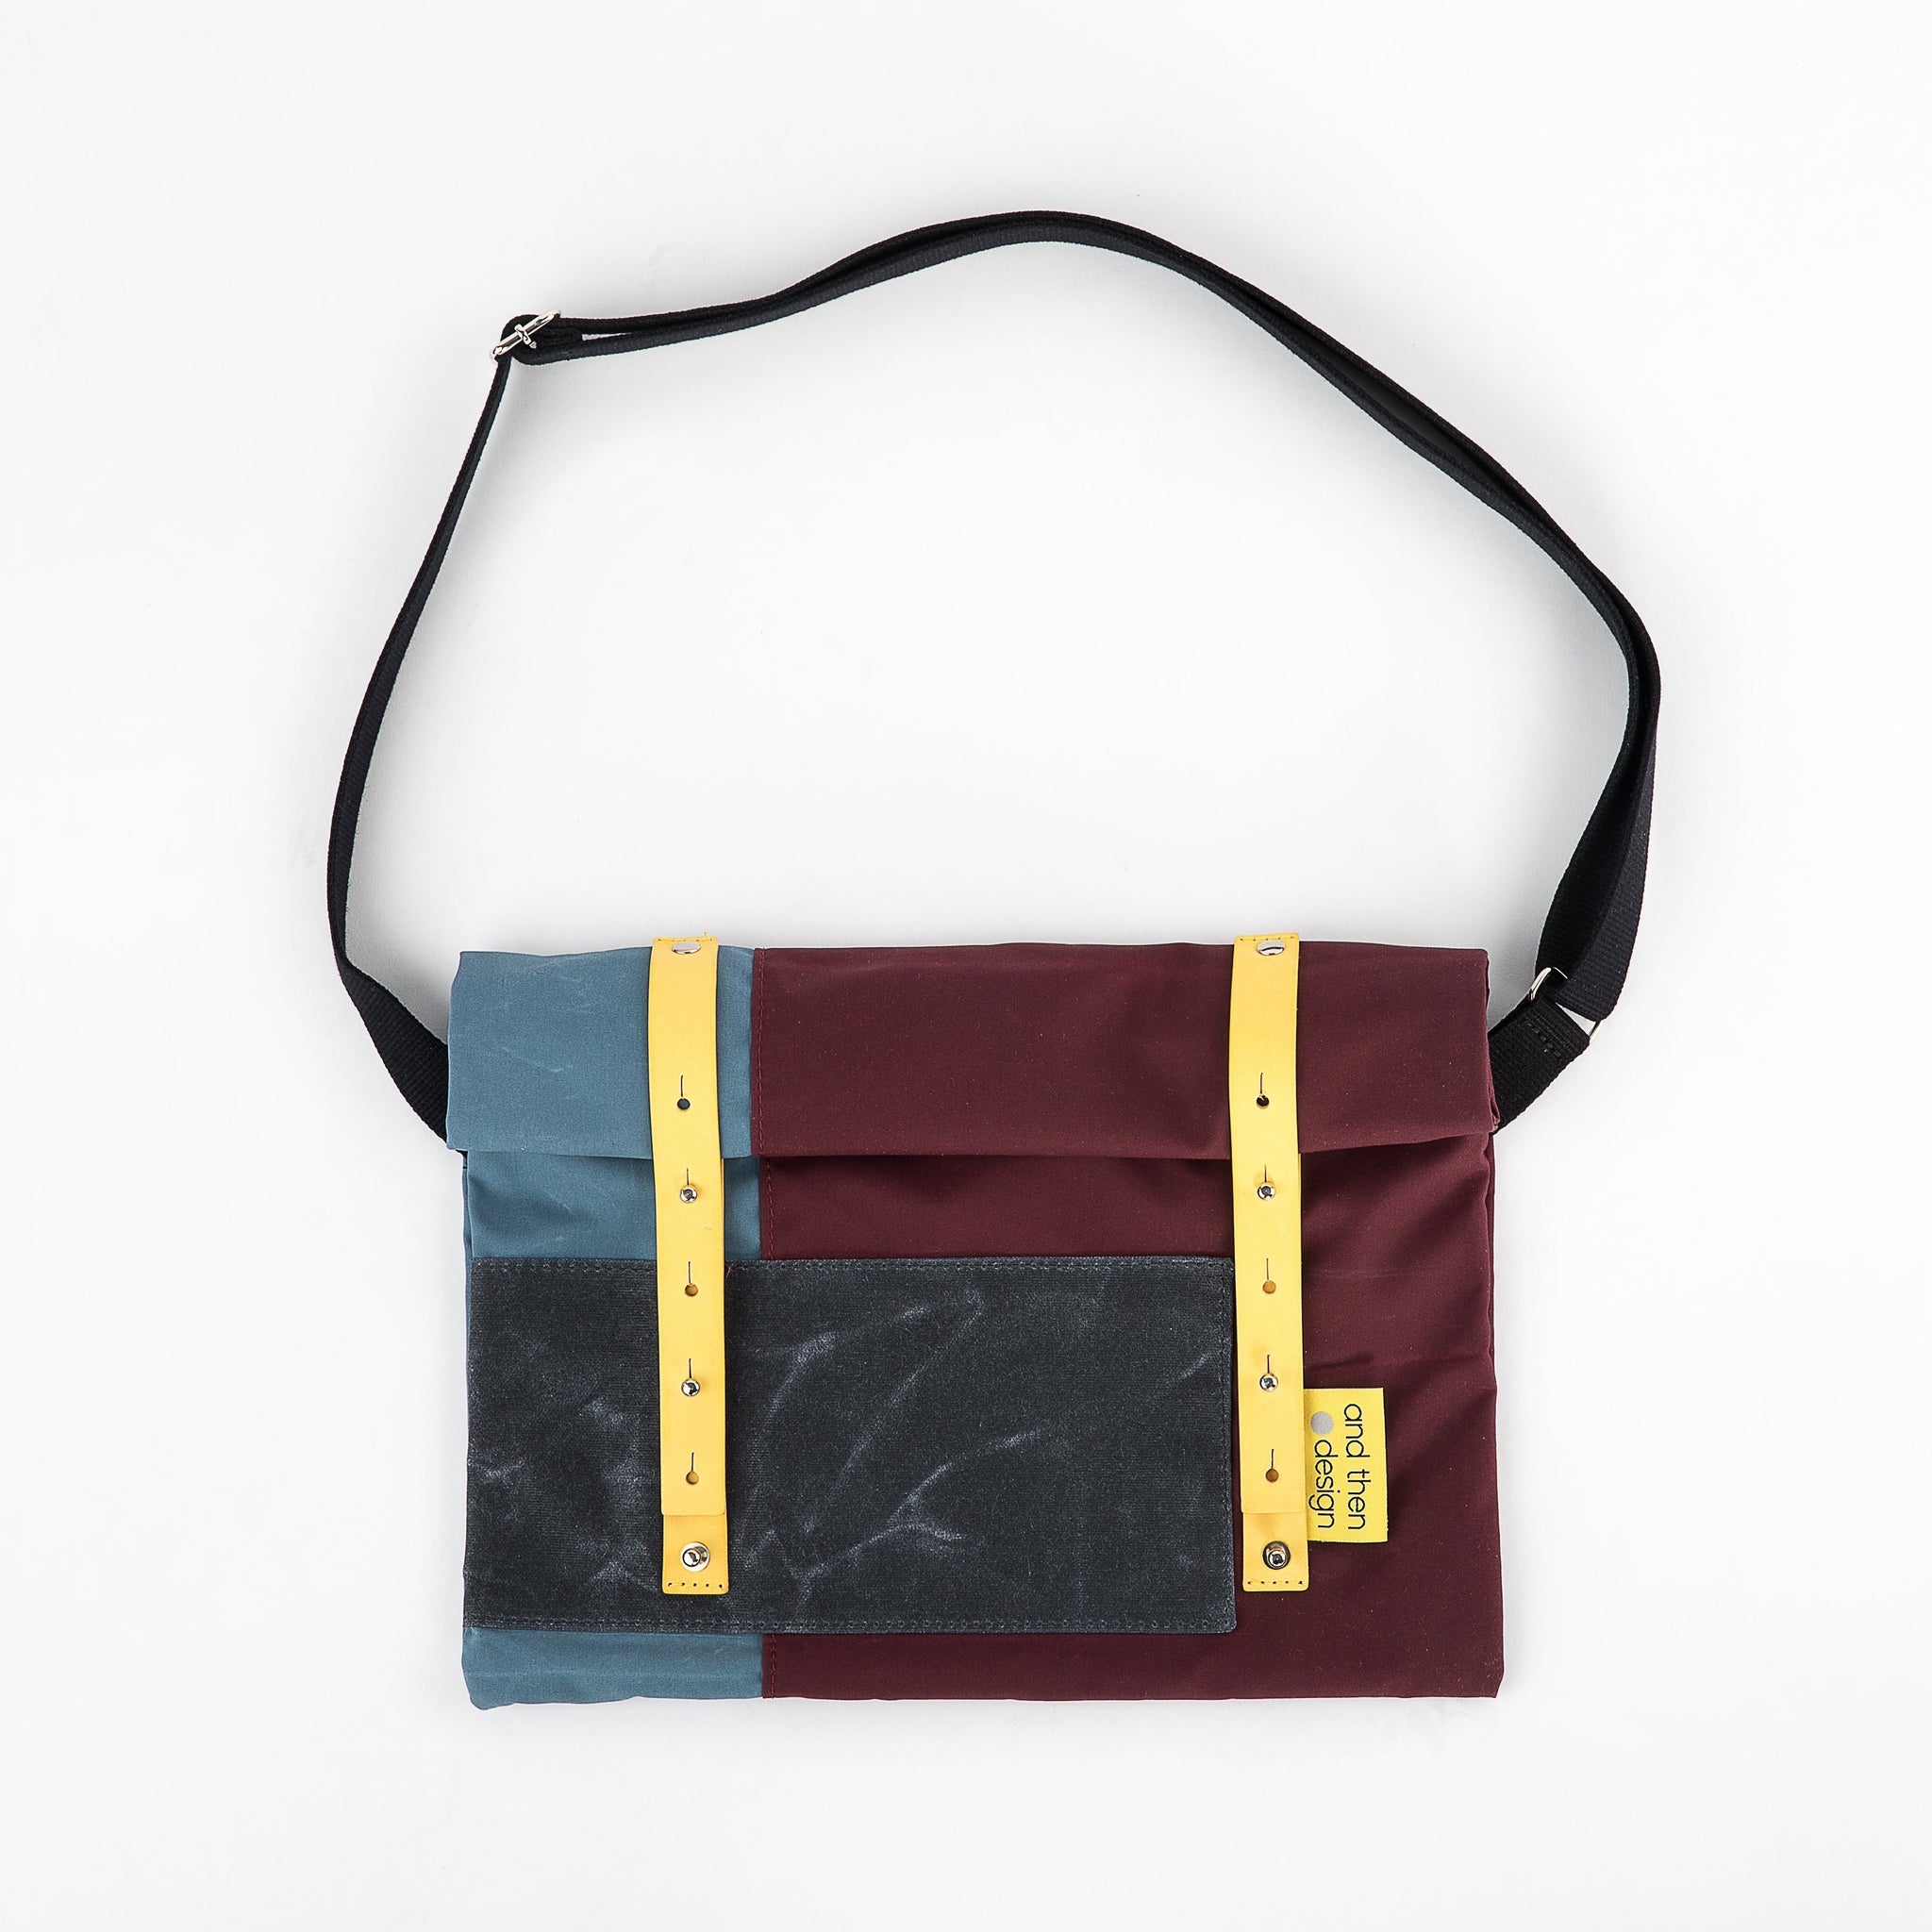 andthen.design an evolution of Vel-Oh.com-Nip Out Bag | Musette zero-1 zero waste shoulder bag, musette, great for cycling or just a small shoulder bag 